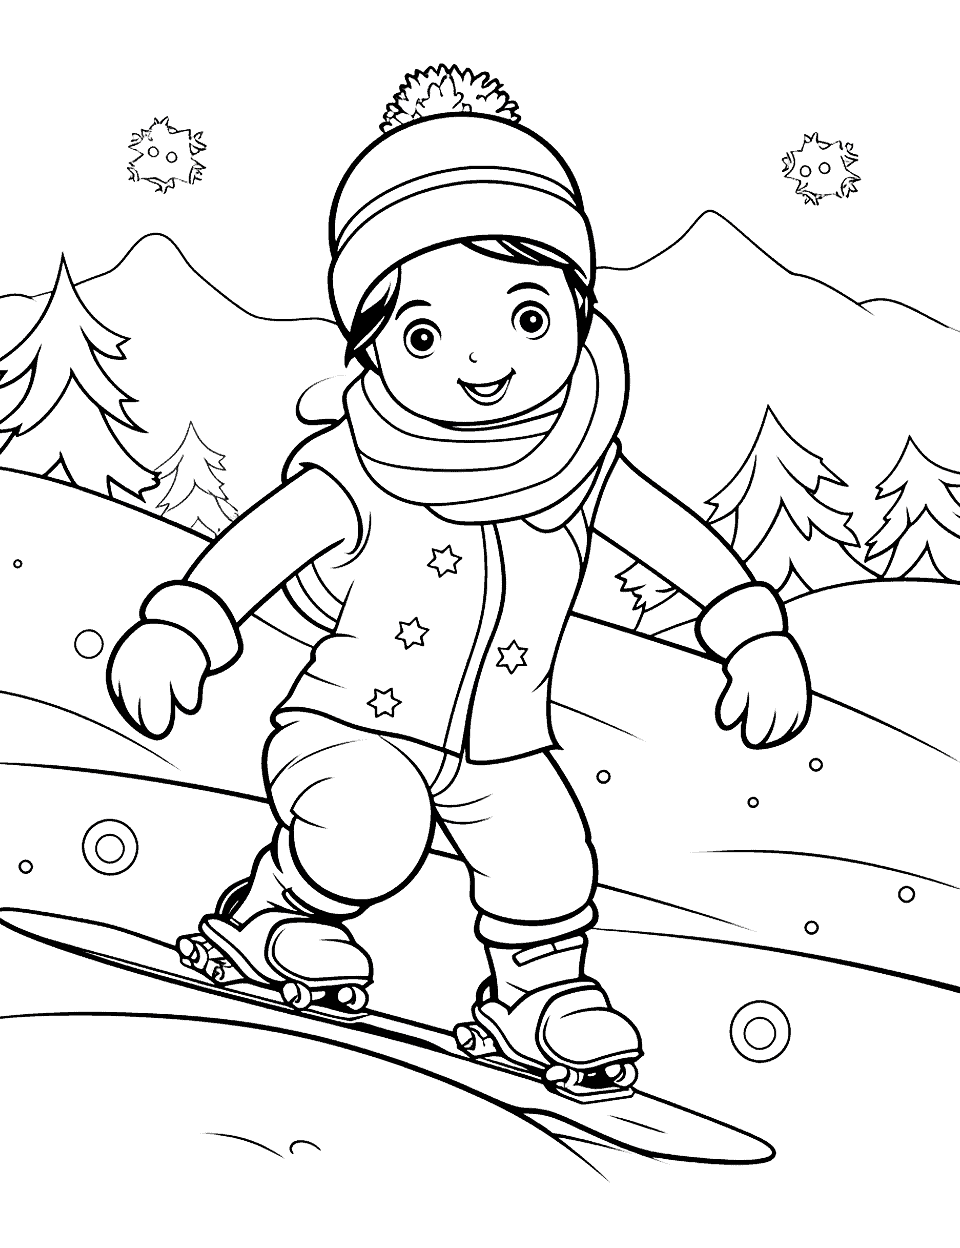 Cool Winter Skateboarding Coloring Page - A snowboarder performing cool tricks in the snow.